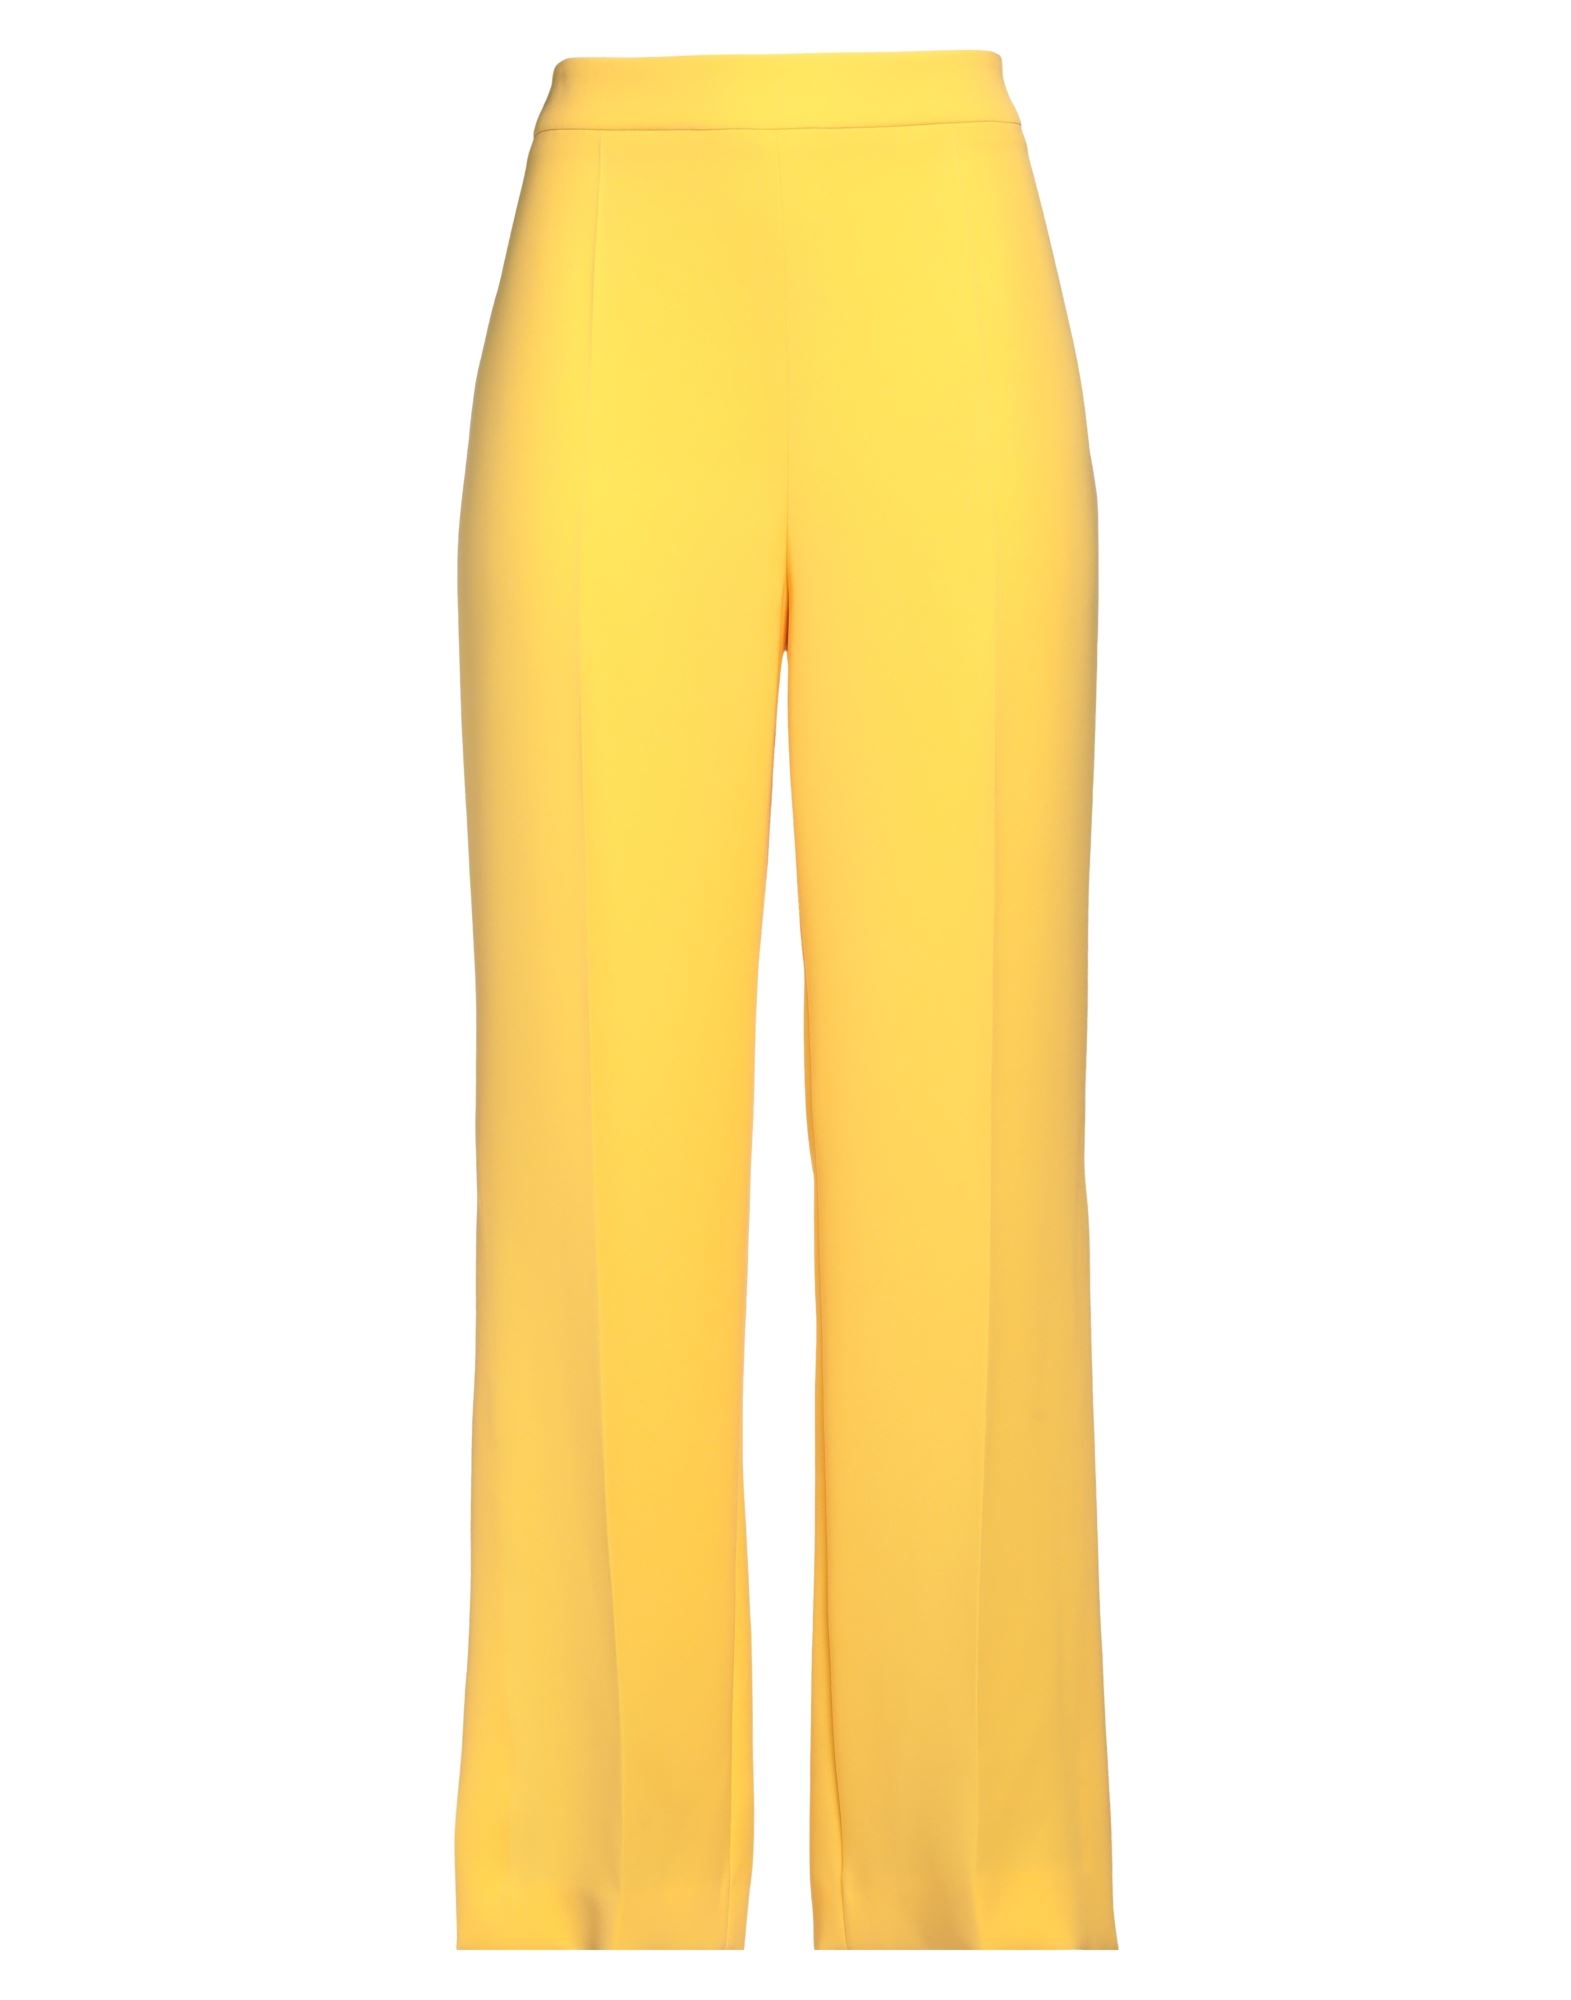 BOUTIQUE MOSCHINO BOUTIQUE MOSCHINO WOMAN PANTS YELLOW SIZE 4 POLYESTER